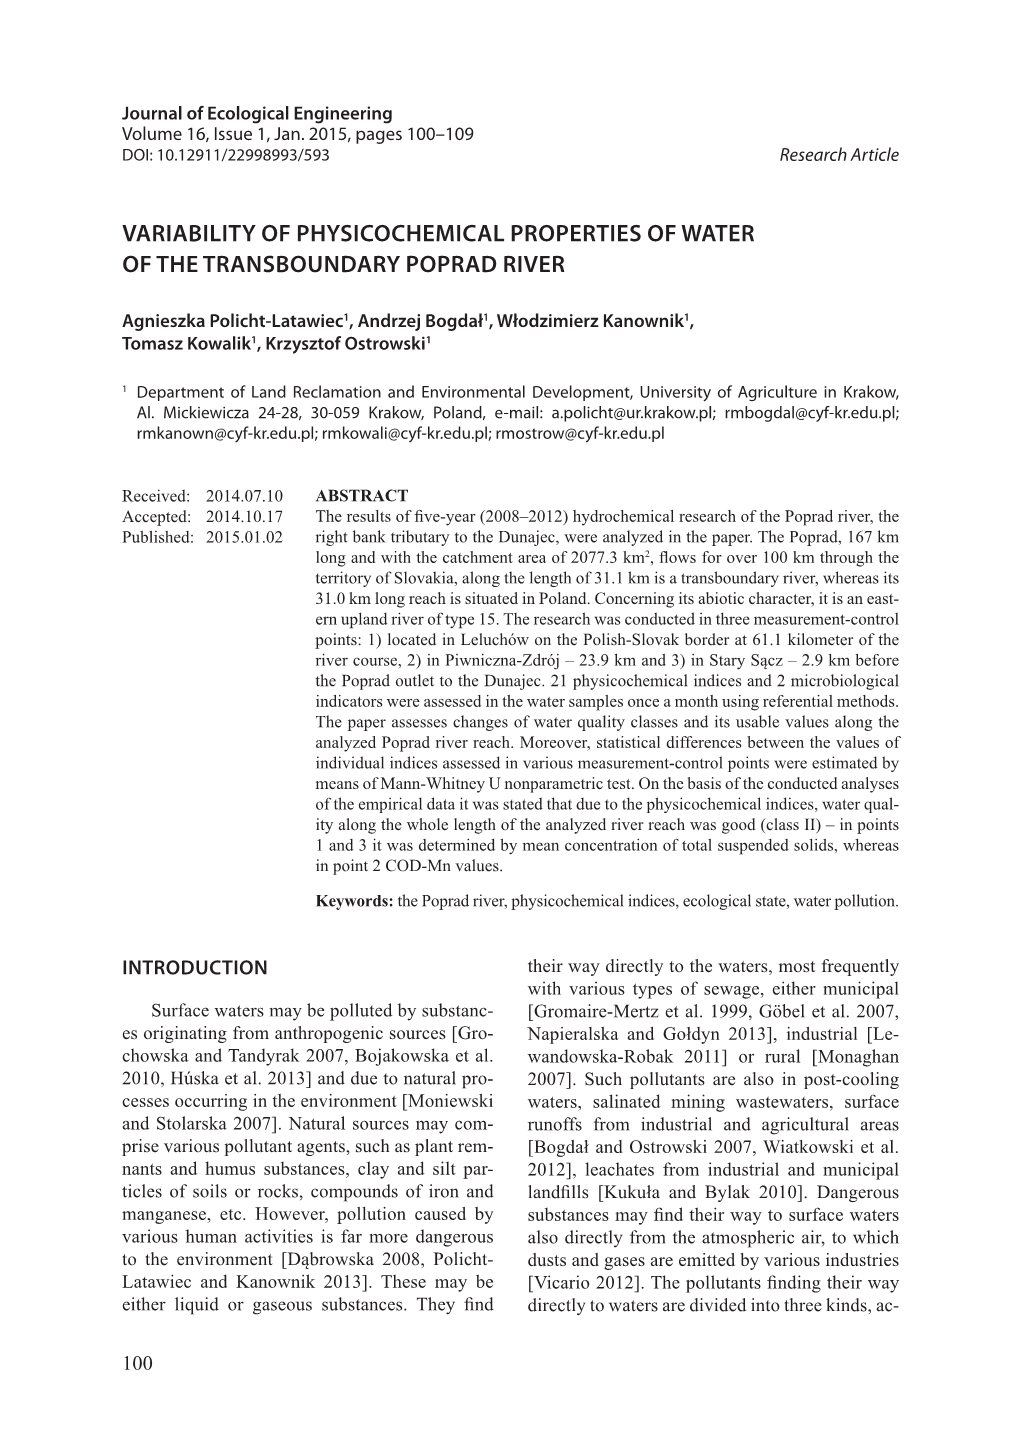 Variability of Physicochemical Properties of Water of the Transboundary Poprad River